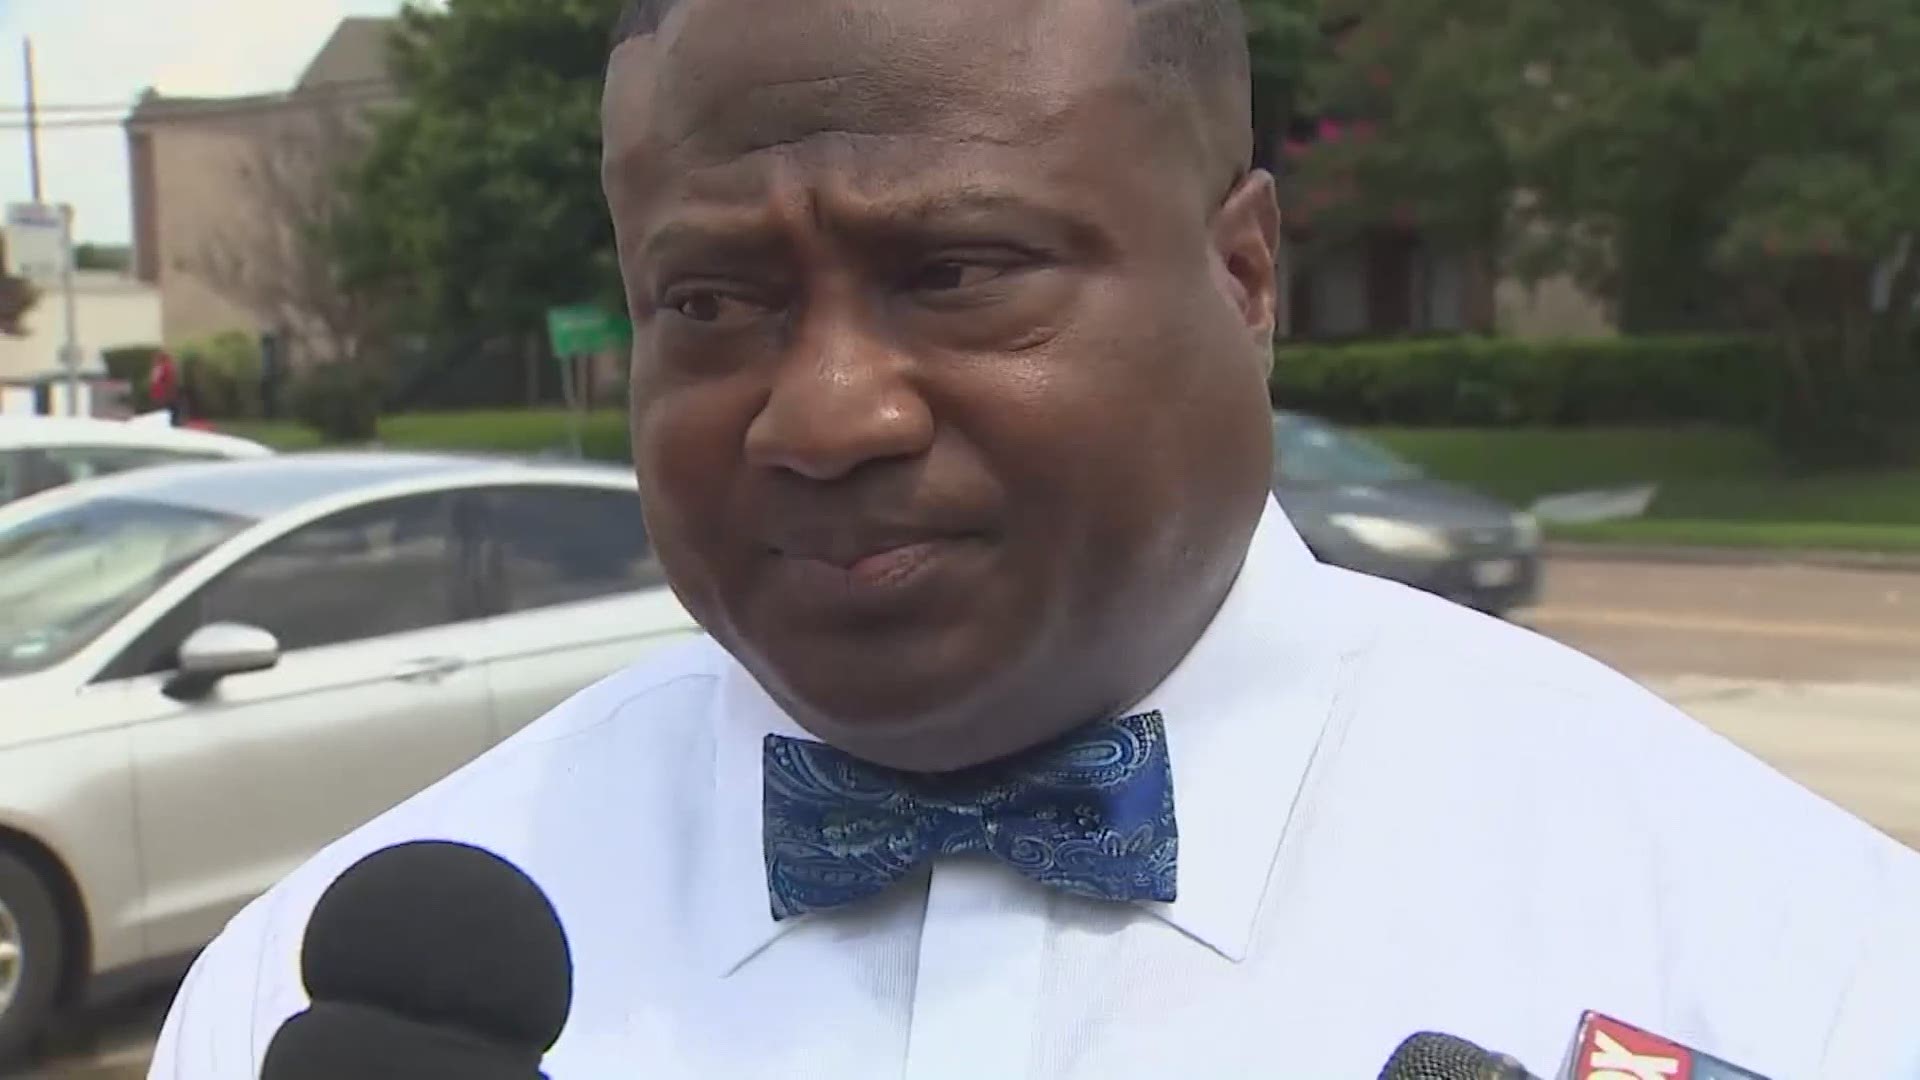 Quanell X says Derion Vence told him Maleah Davis' death was an accident and that he dumped her body in Arkansas.